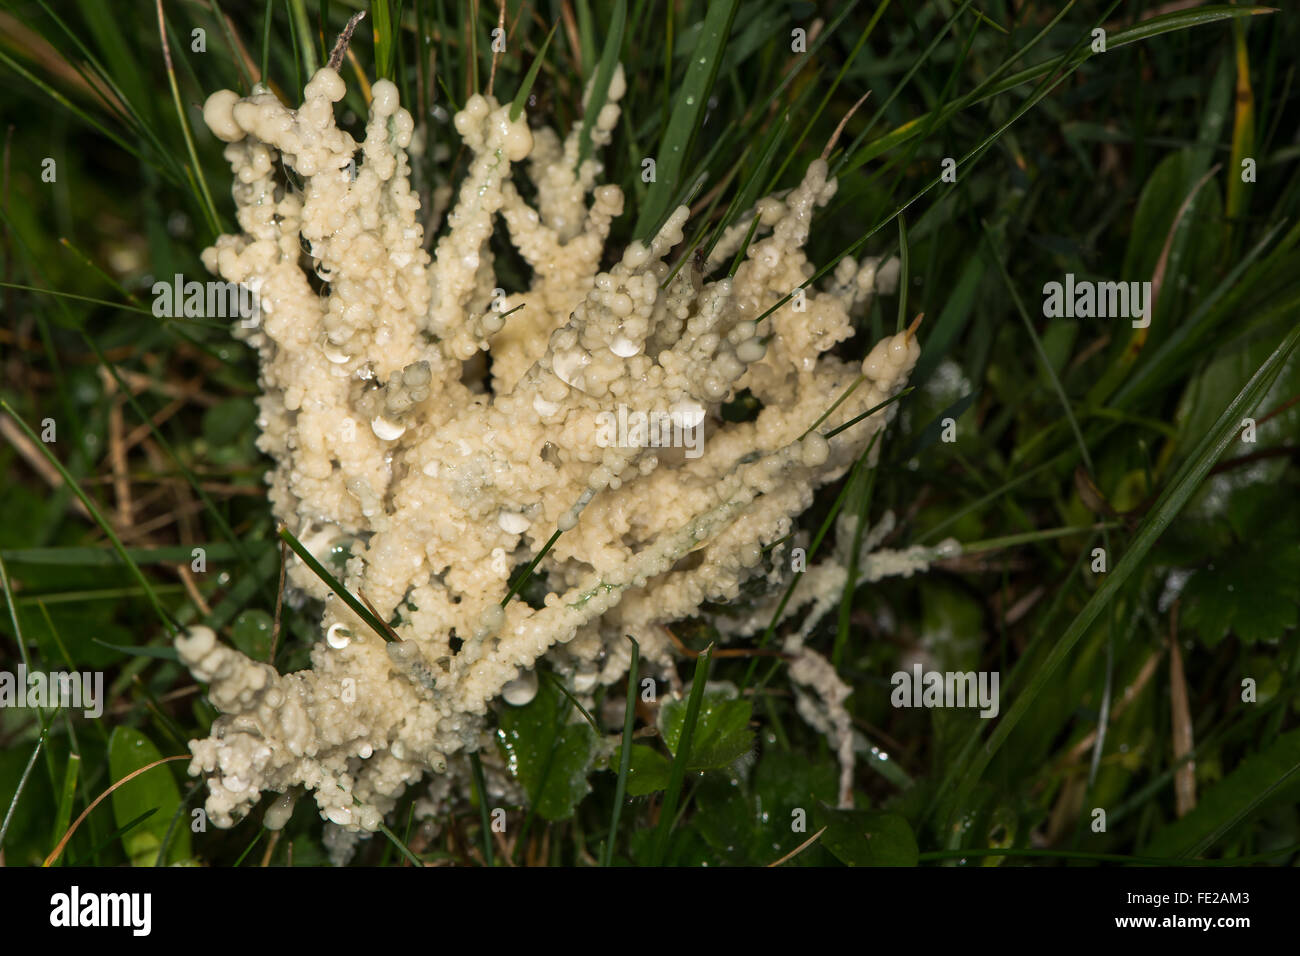 Dog sick slime mould (Mucilago crustacea). A slime mould growing on grass, in the family Didymiaceae Stock Photo